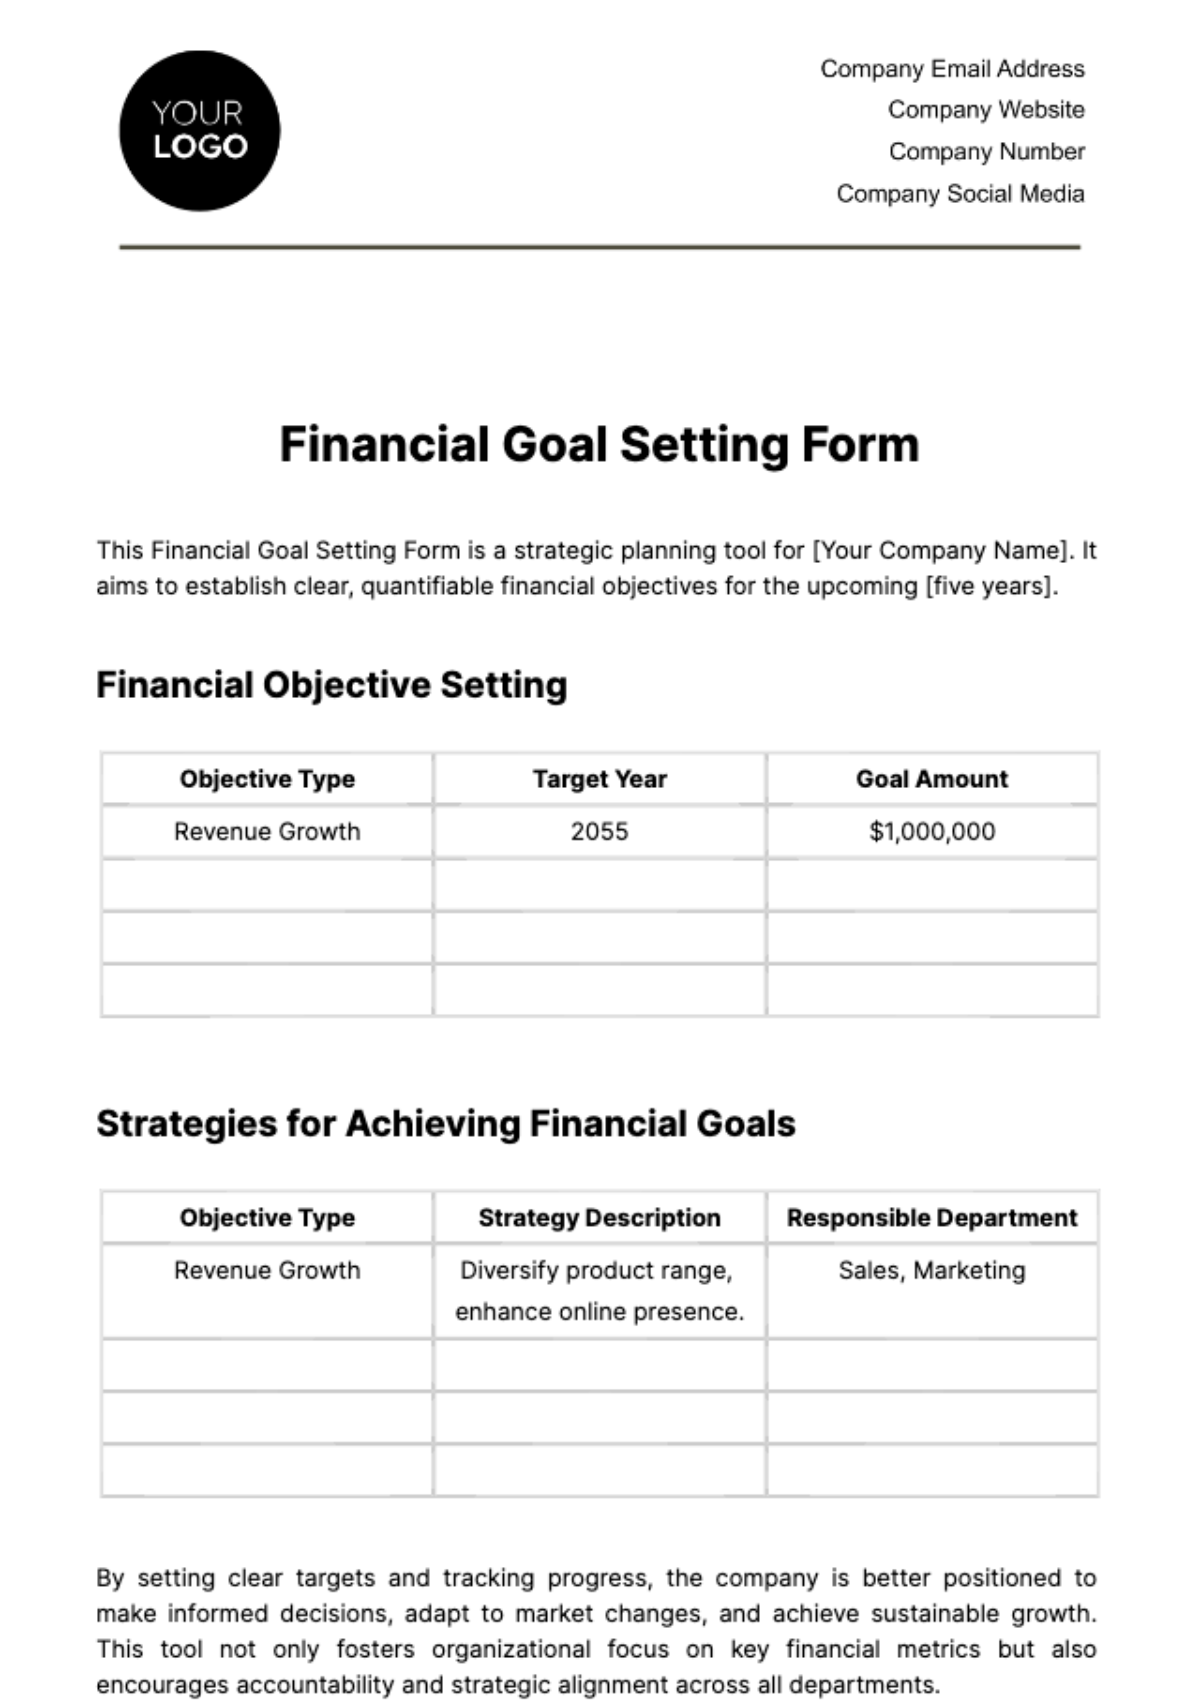 Free Financial Goal Setting Form Template